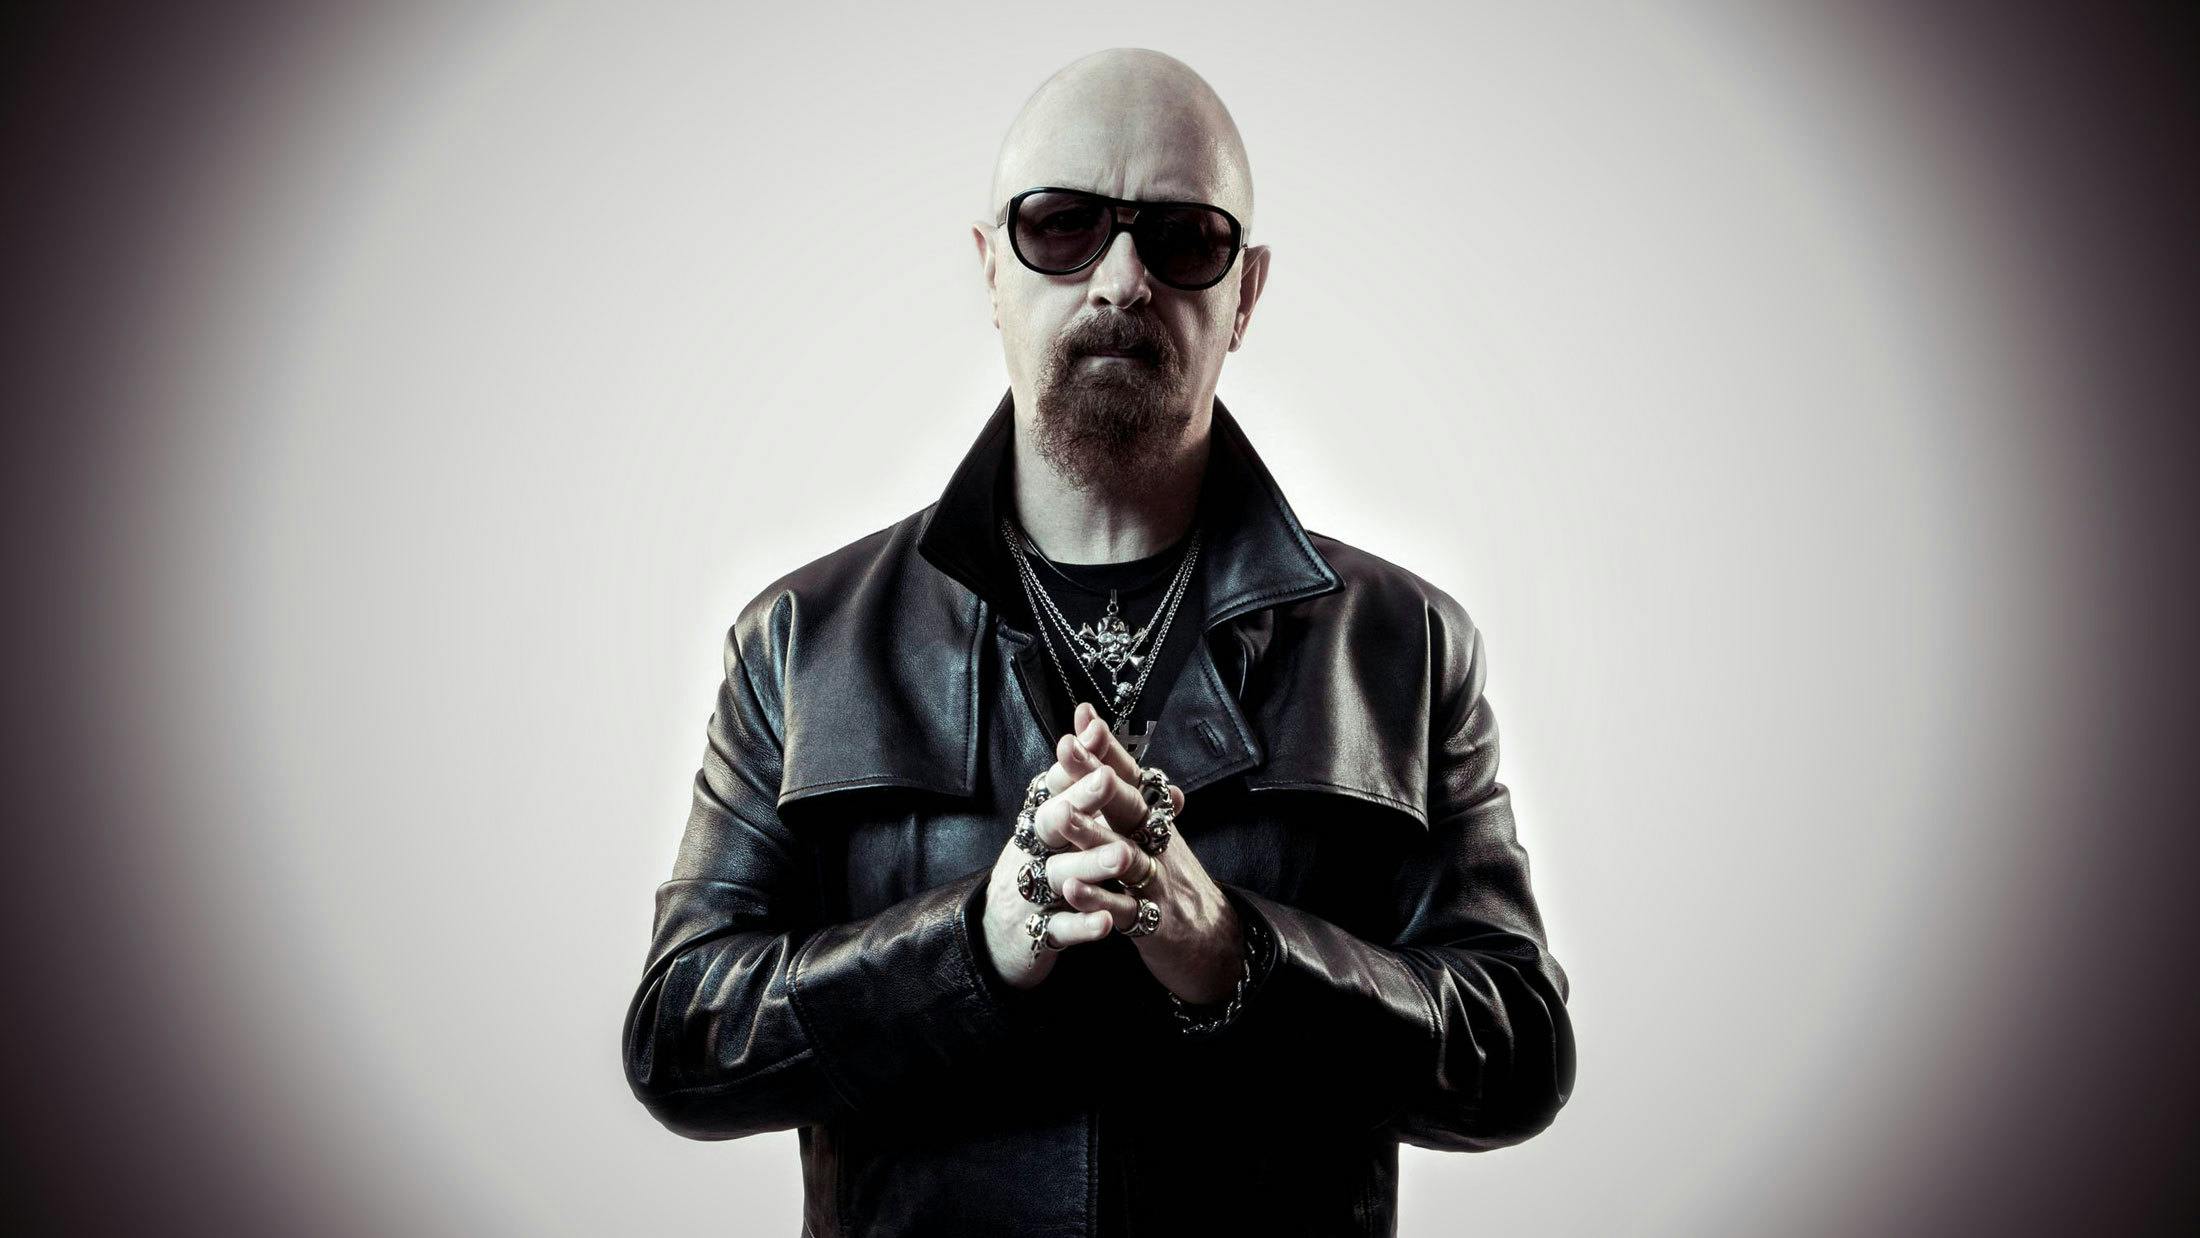 Rob Halford: "We still talk about sexual orientation, skin colour, 'My religion's better than yours.' You'd think we'd have moved on…"